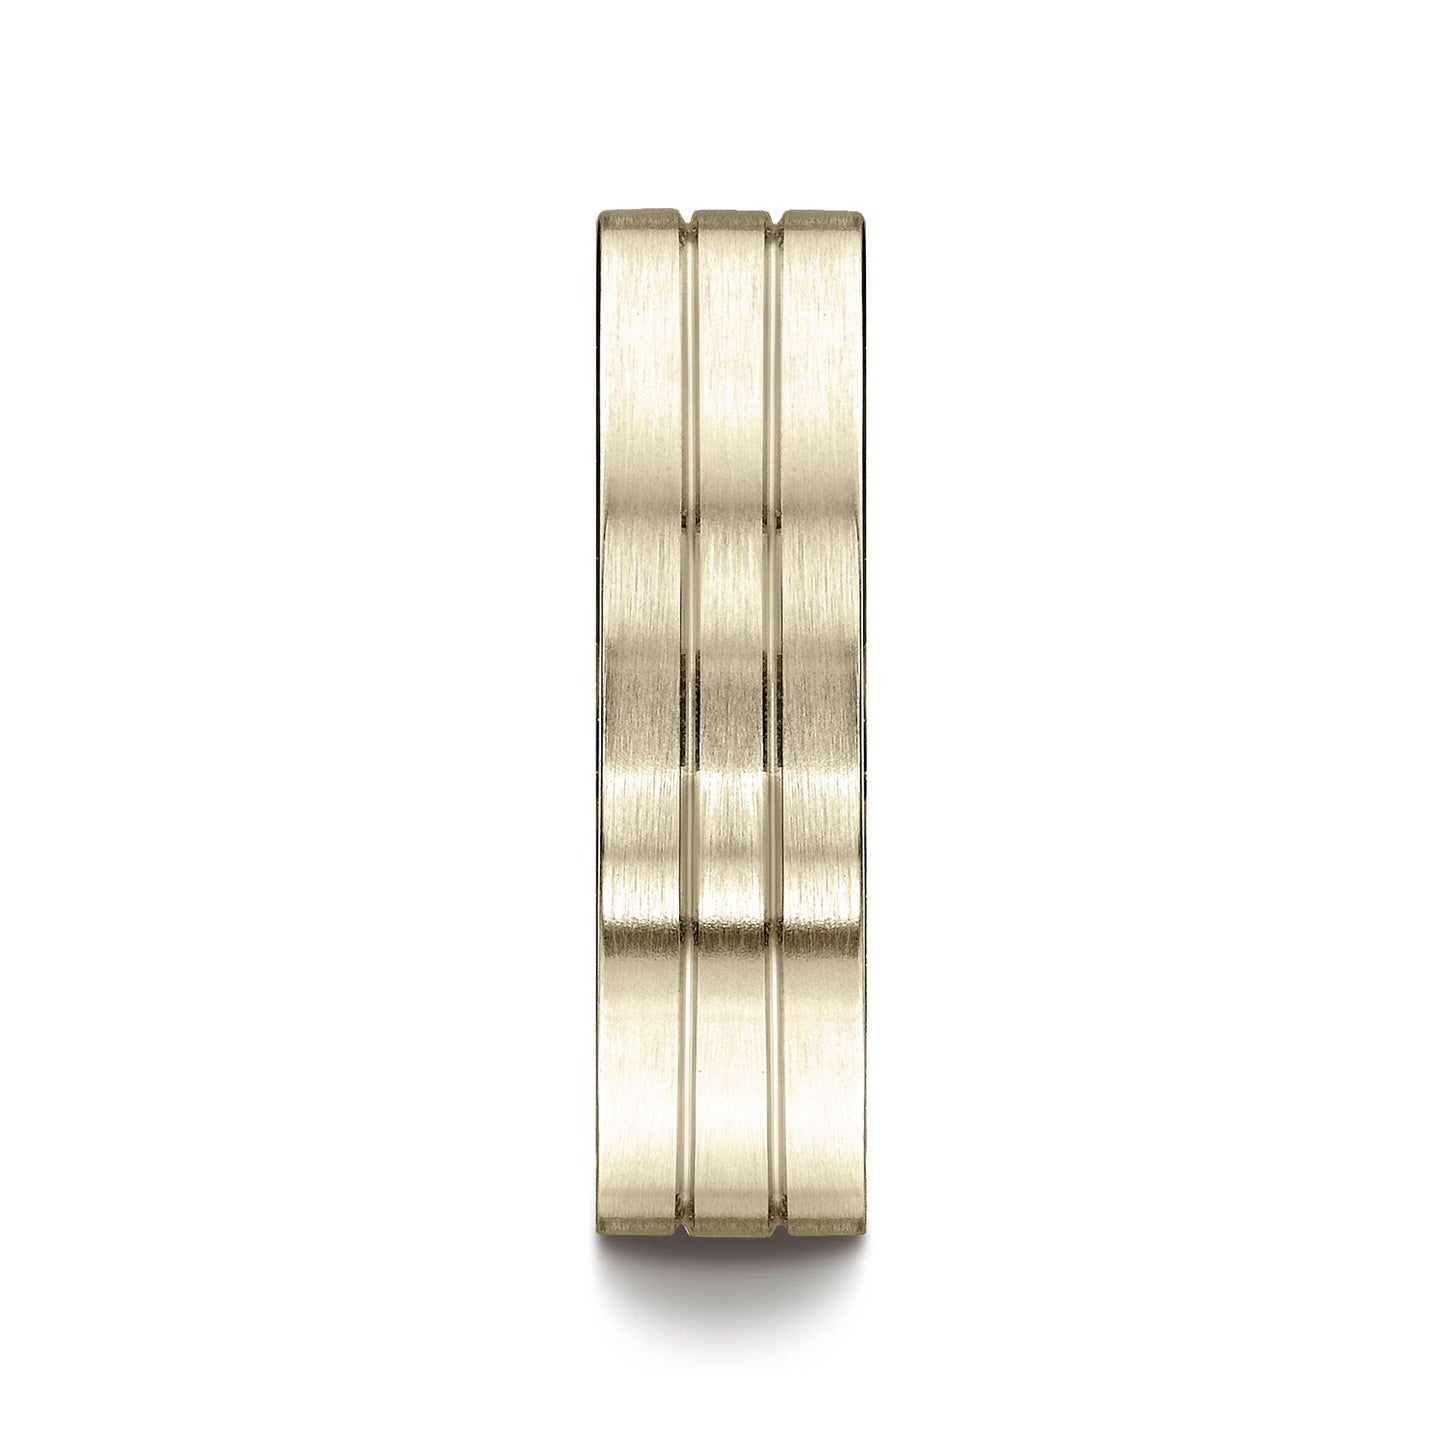 14k Yellow Gold 6mm Comfort-fit Satin-finished With Parallel Center Cuts Carved Design Band